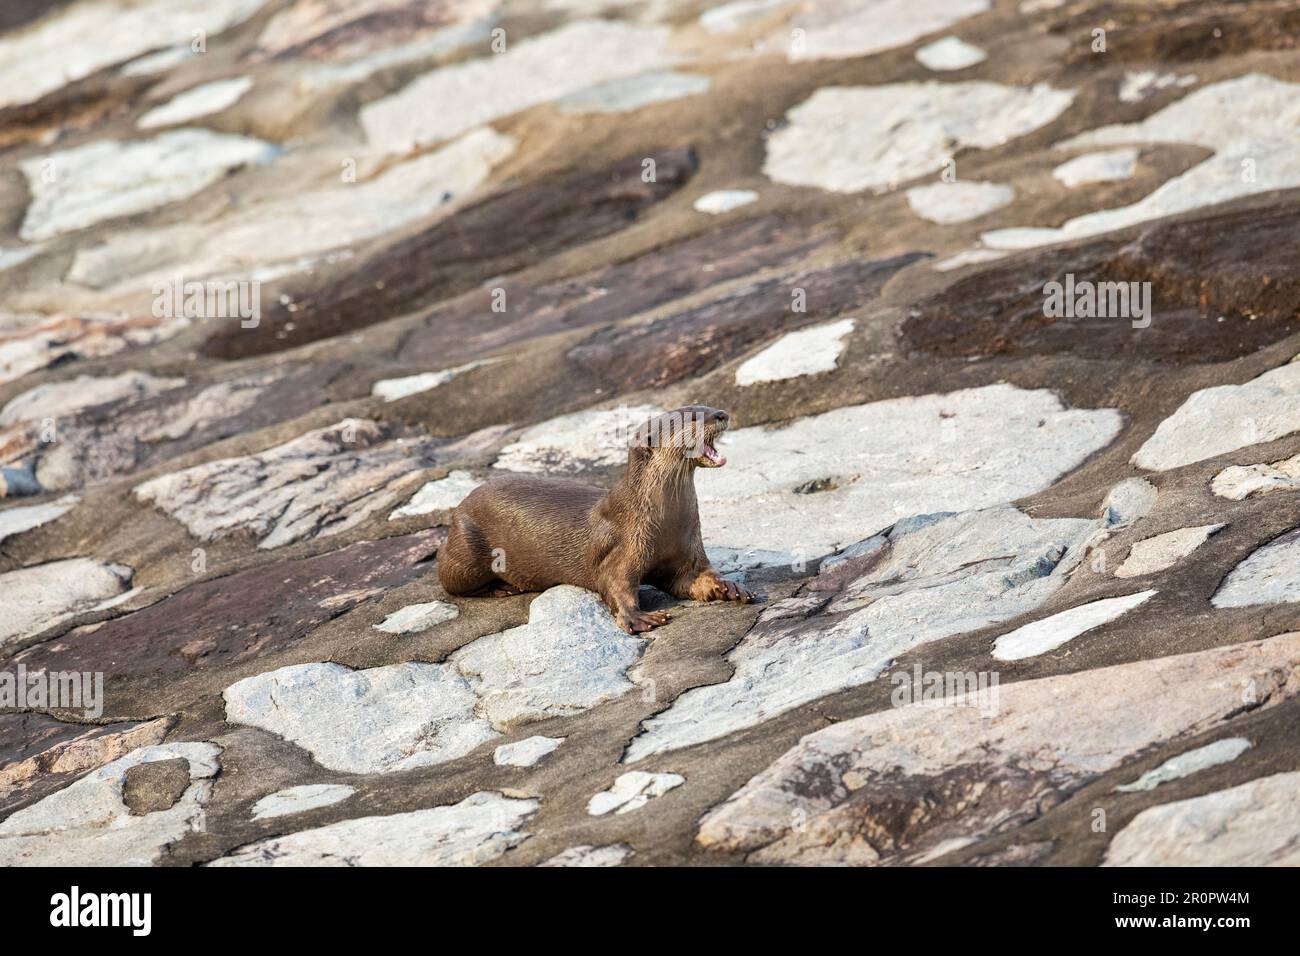 A member of a family of four smooth coated otters yawns while resting on the bank of a reservoir, Singapore Stock Photo